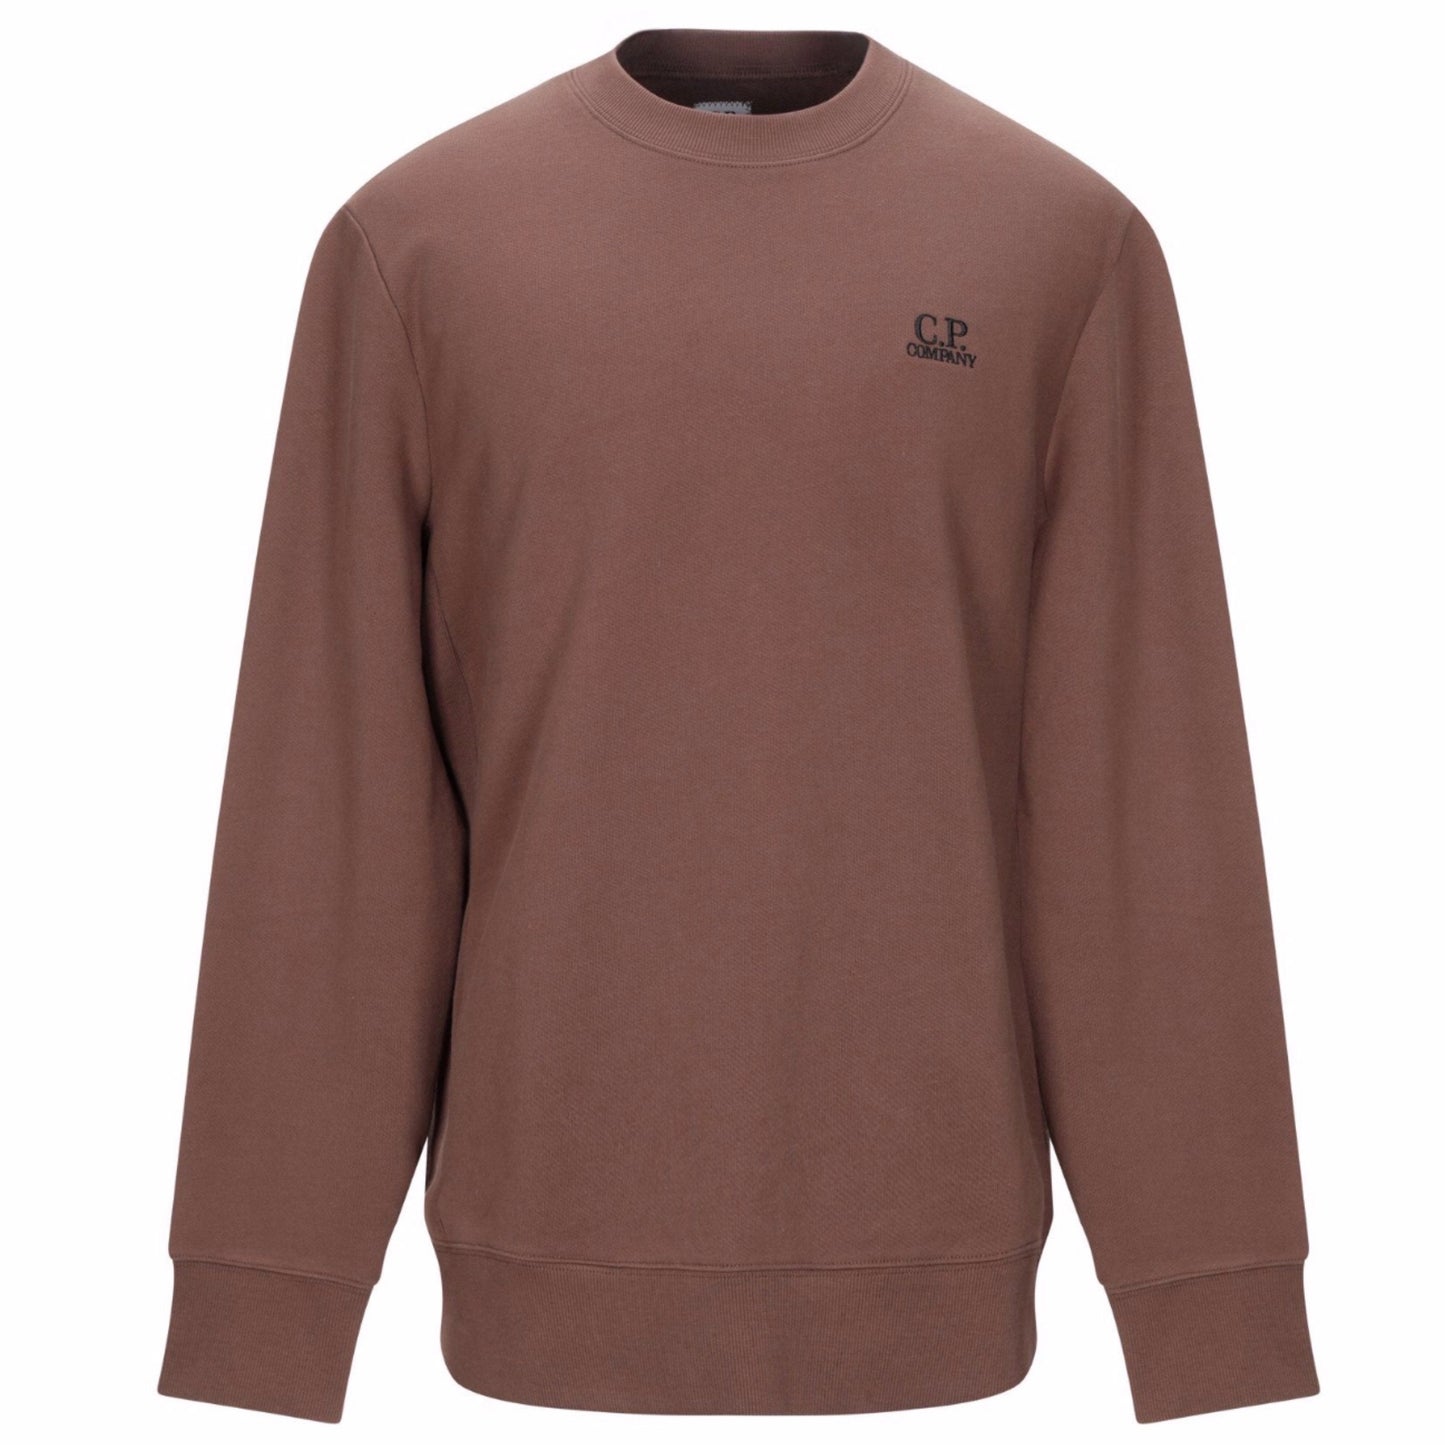 CP Company Brown Embroidered Crewneck - DANYOUNGUK